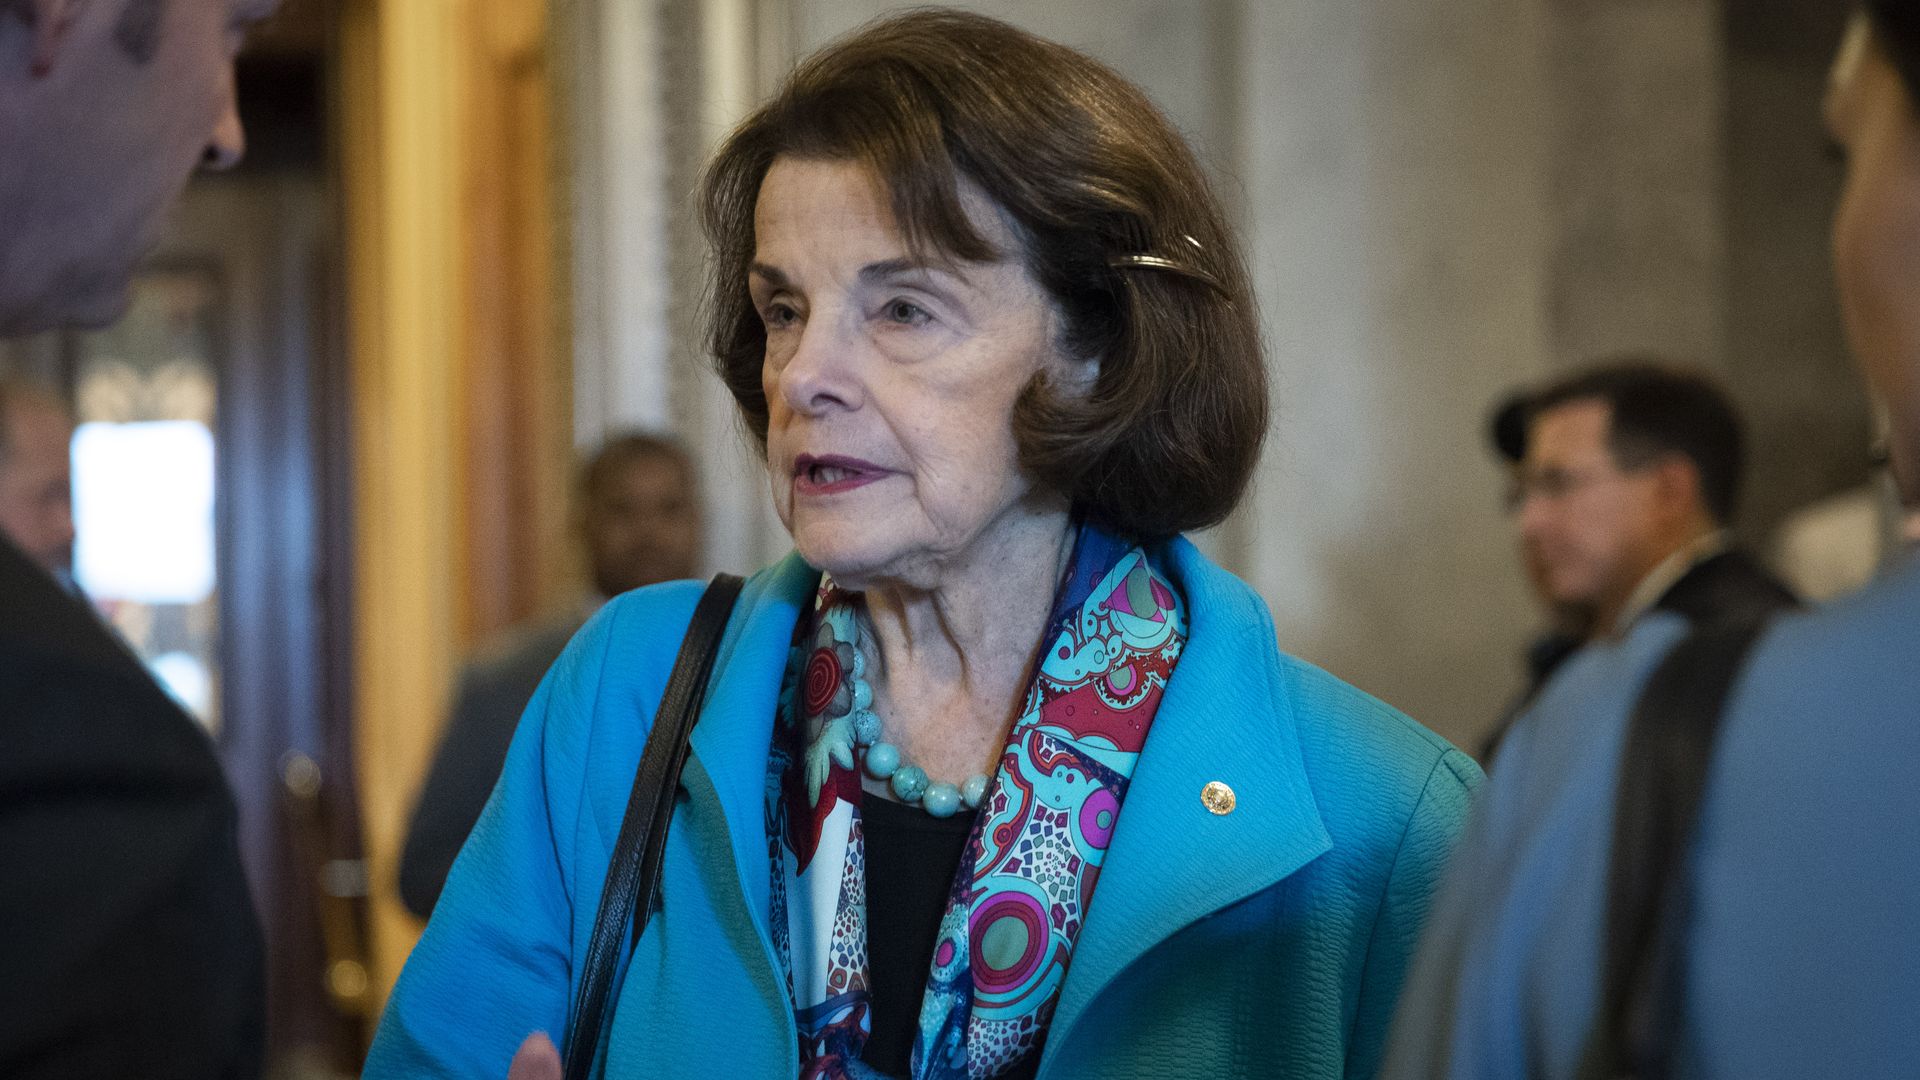 In this image, Dianne Feinstein wears a bright blue coat and speaks to reporters. 